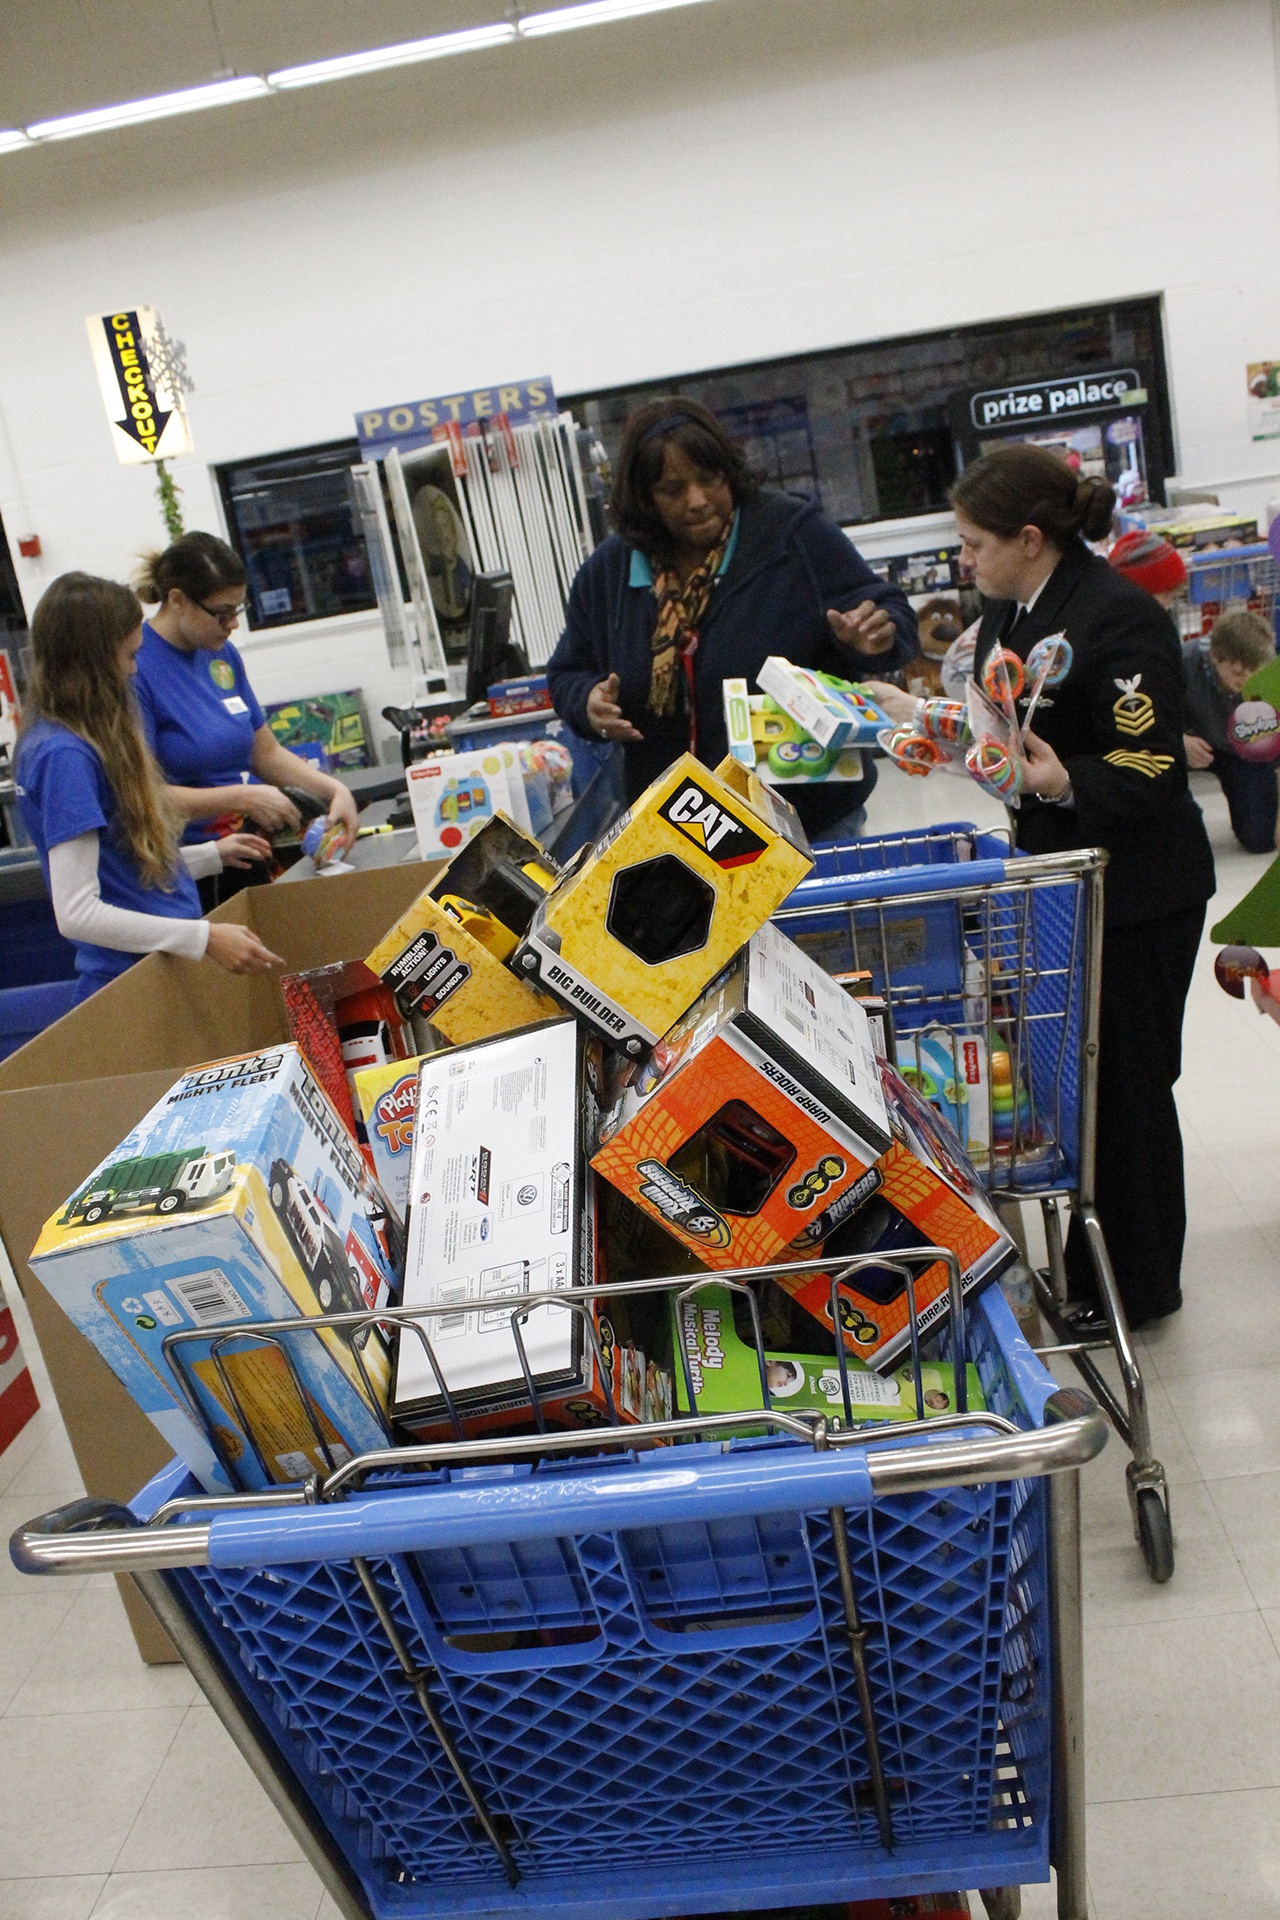 Checking out at Toys R Us. Toys R Us employees set back popular toys when they are on sale so that the Marines get “the good stuff” and at a great, discounted price. Mark Briant/Kitsap Daily News